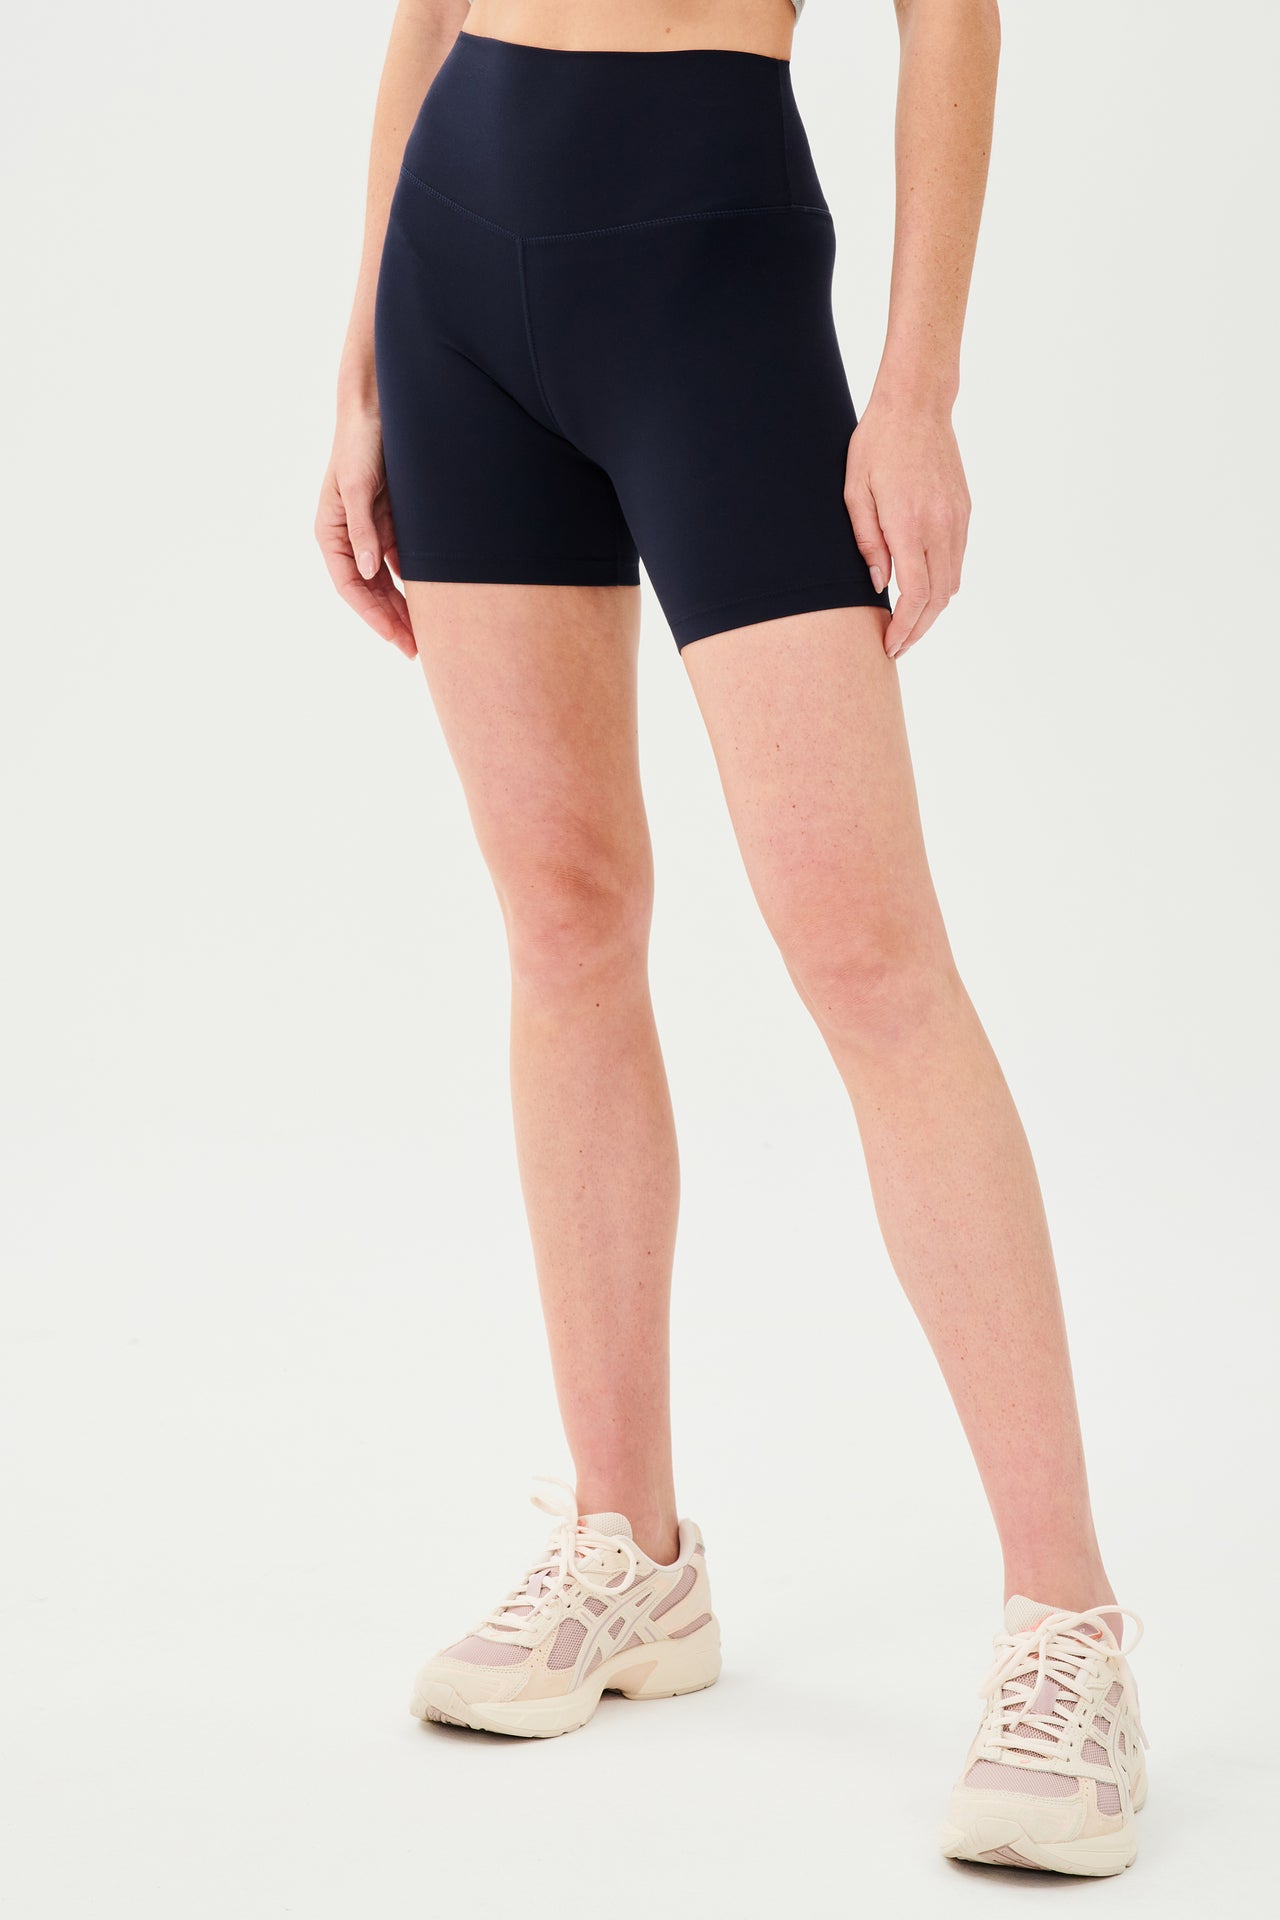 Side view of girl wearing highwaisted mid thigh dark blue bike shorts with white shoes